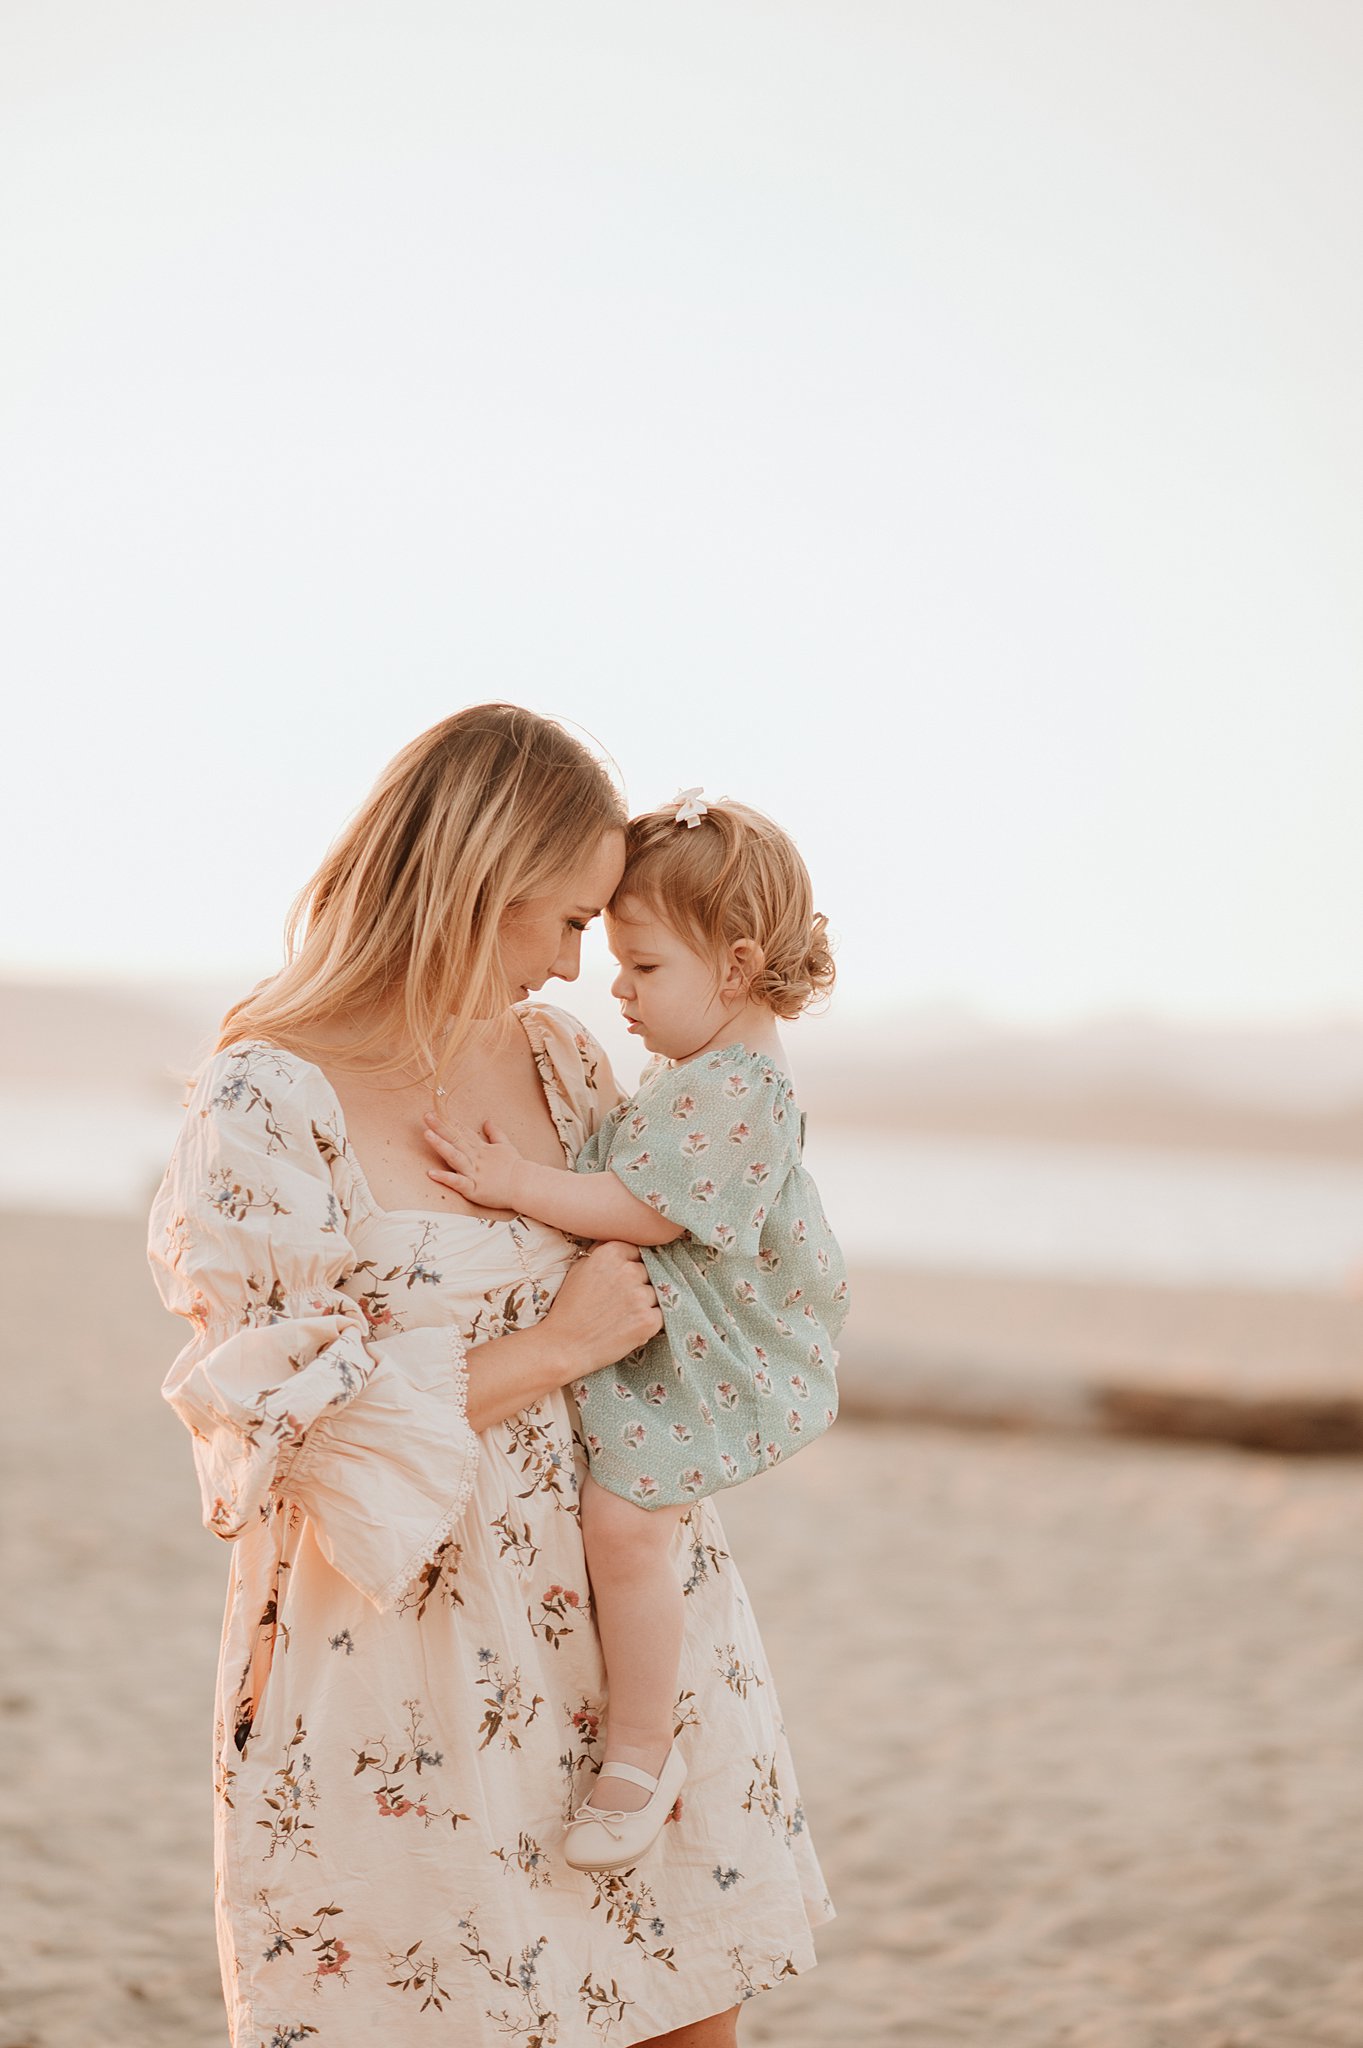 A mother and daughter in floral print dresses stand on a beach at sunset touching foreheads